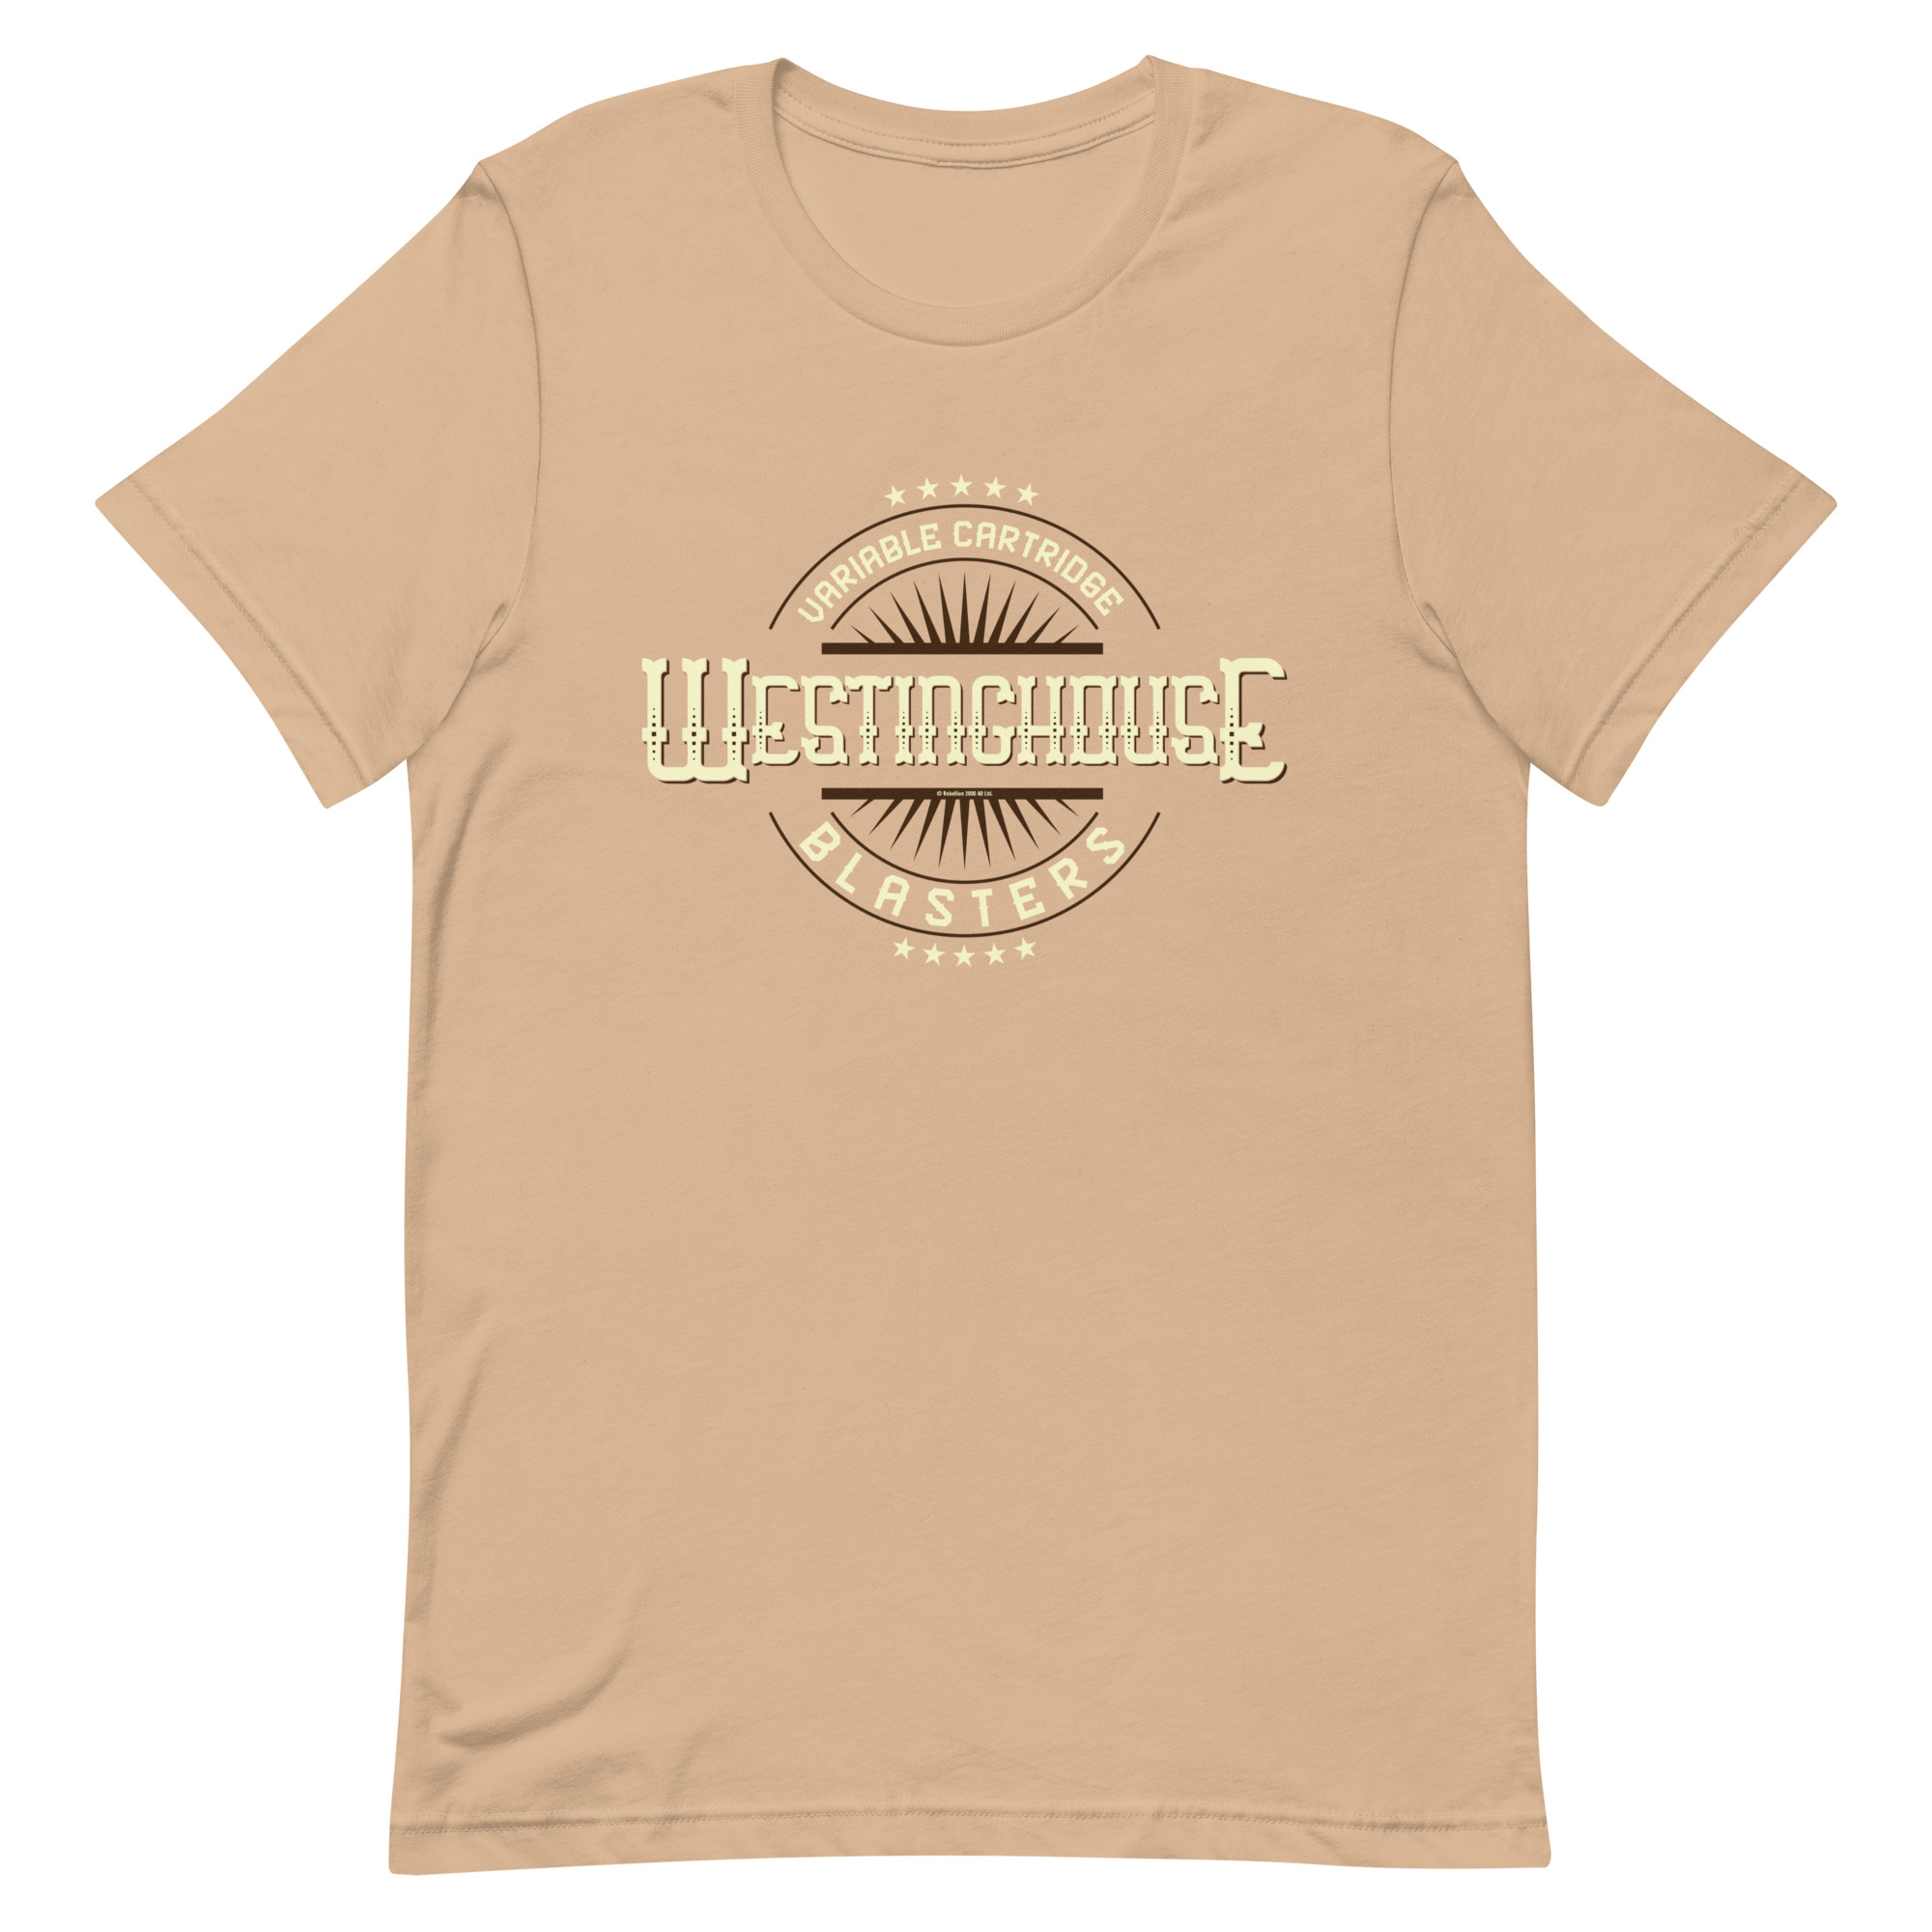 Tan Tshirt with a logo that reads 